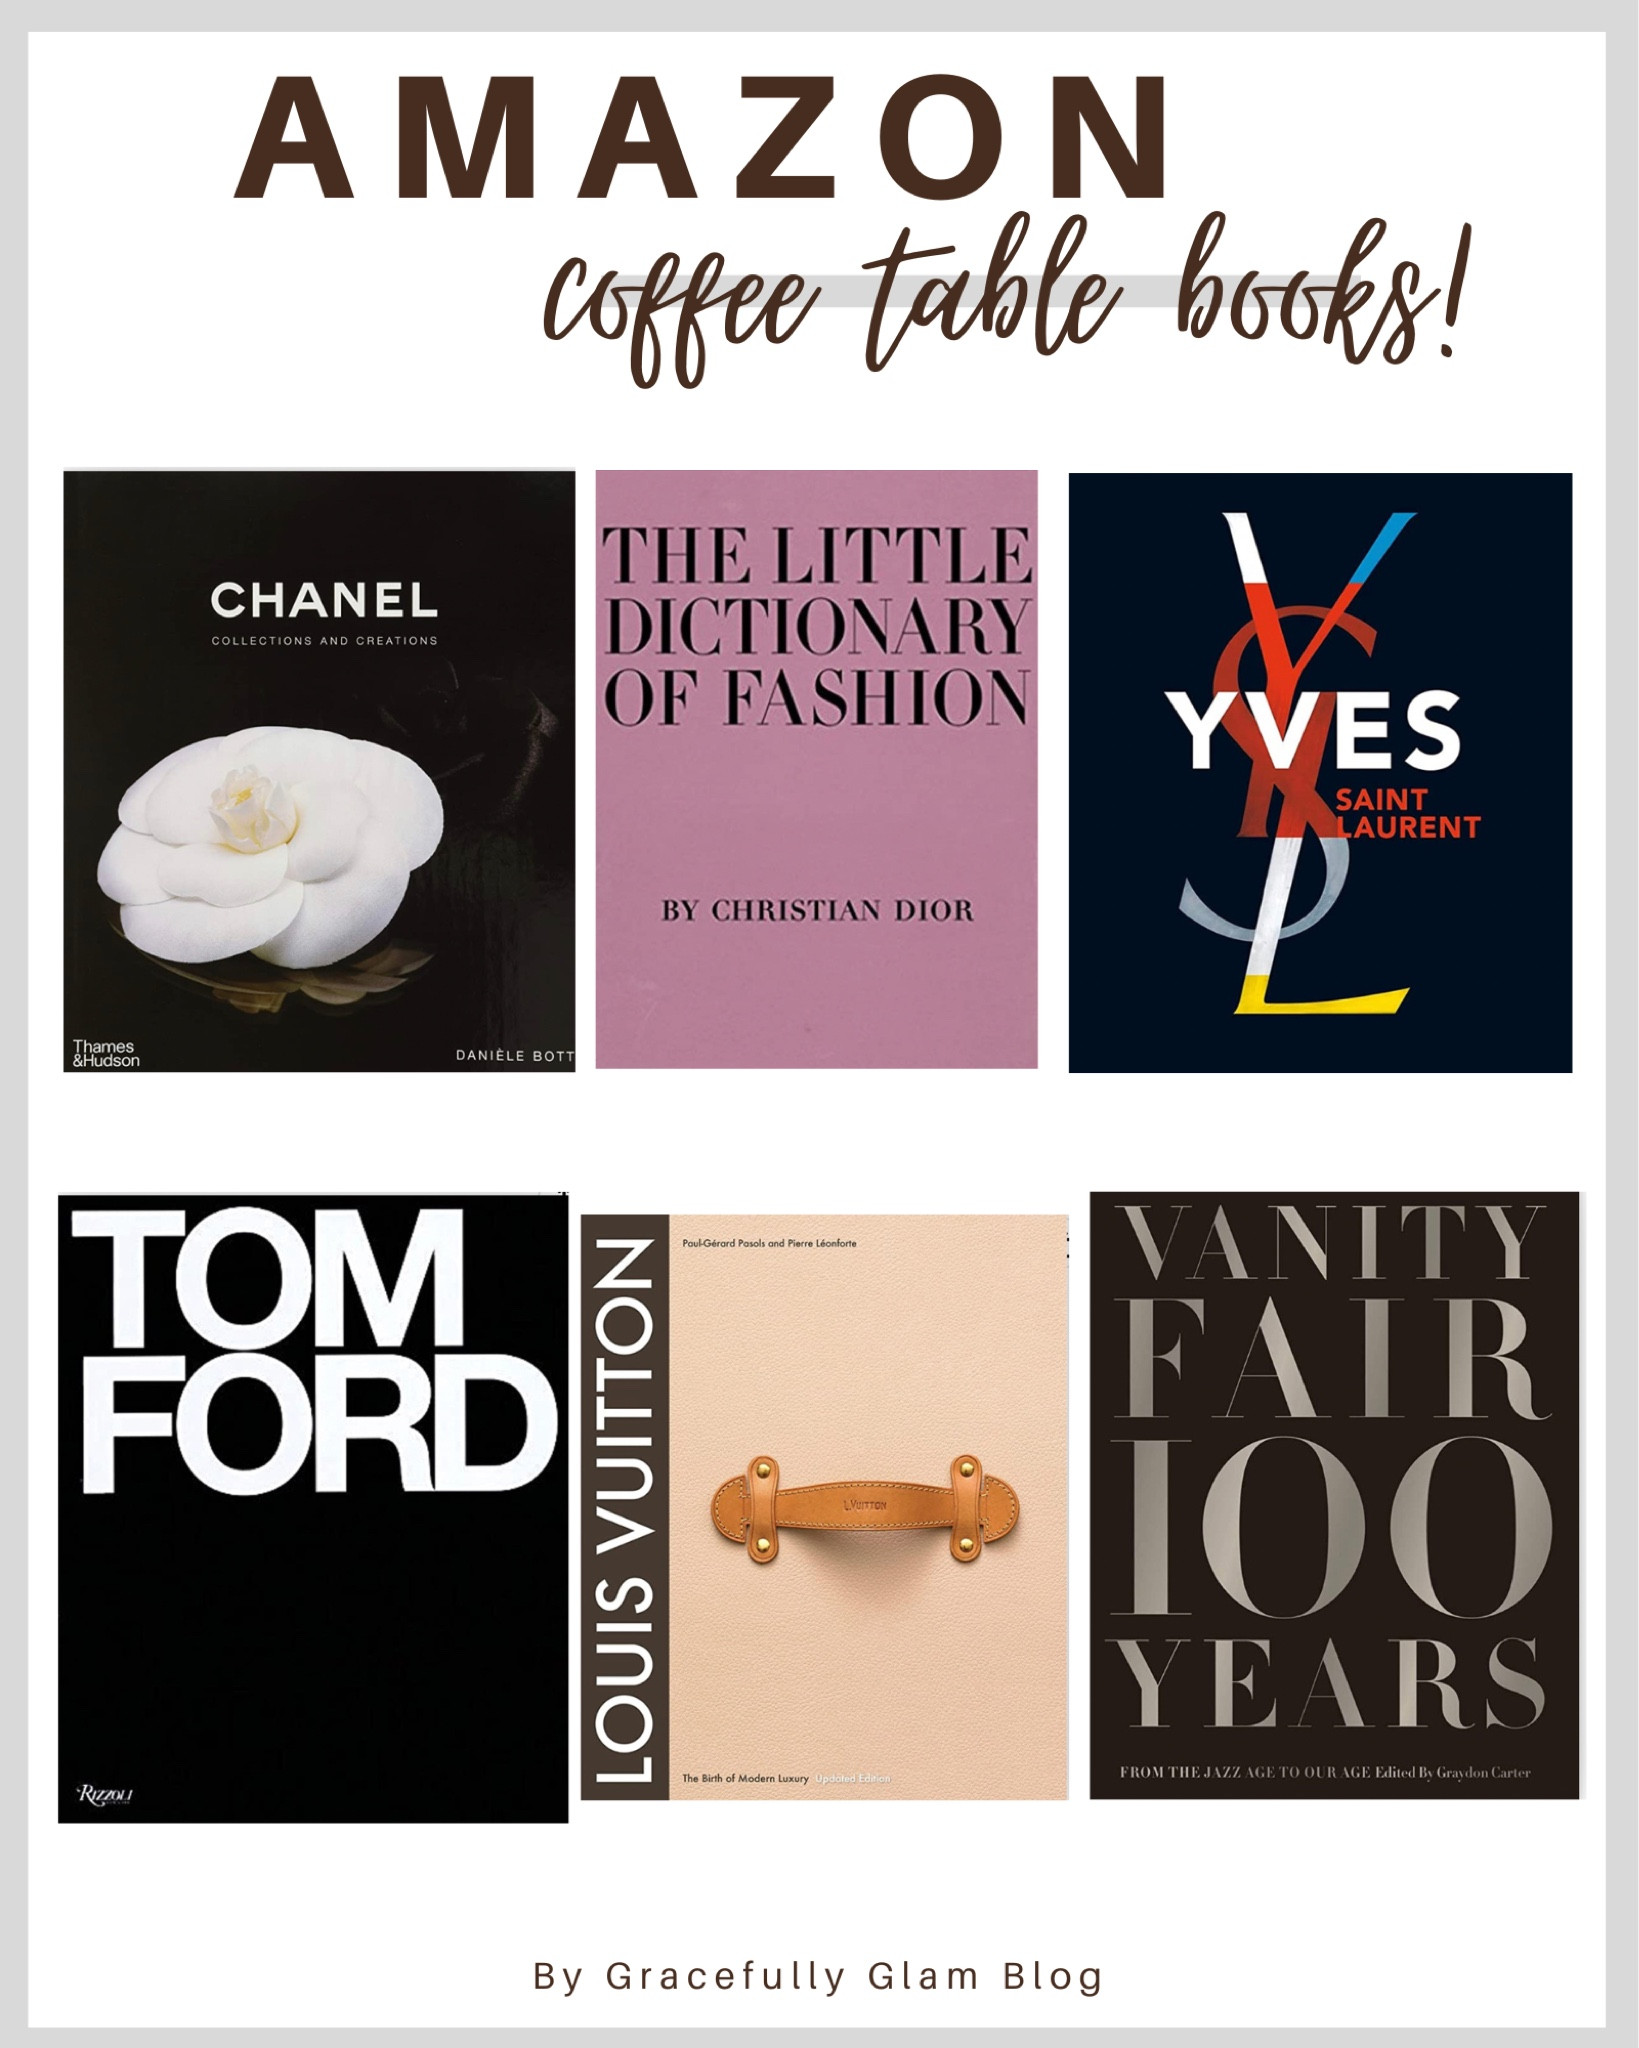 The Chanel Collections & Creations Book ~ A coffee table MUST-HAVE